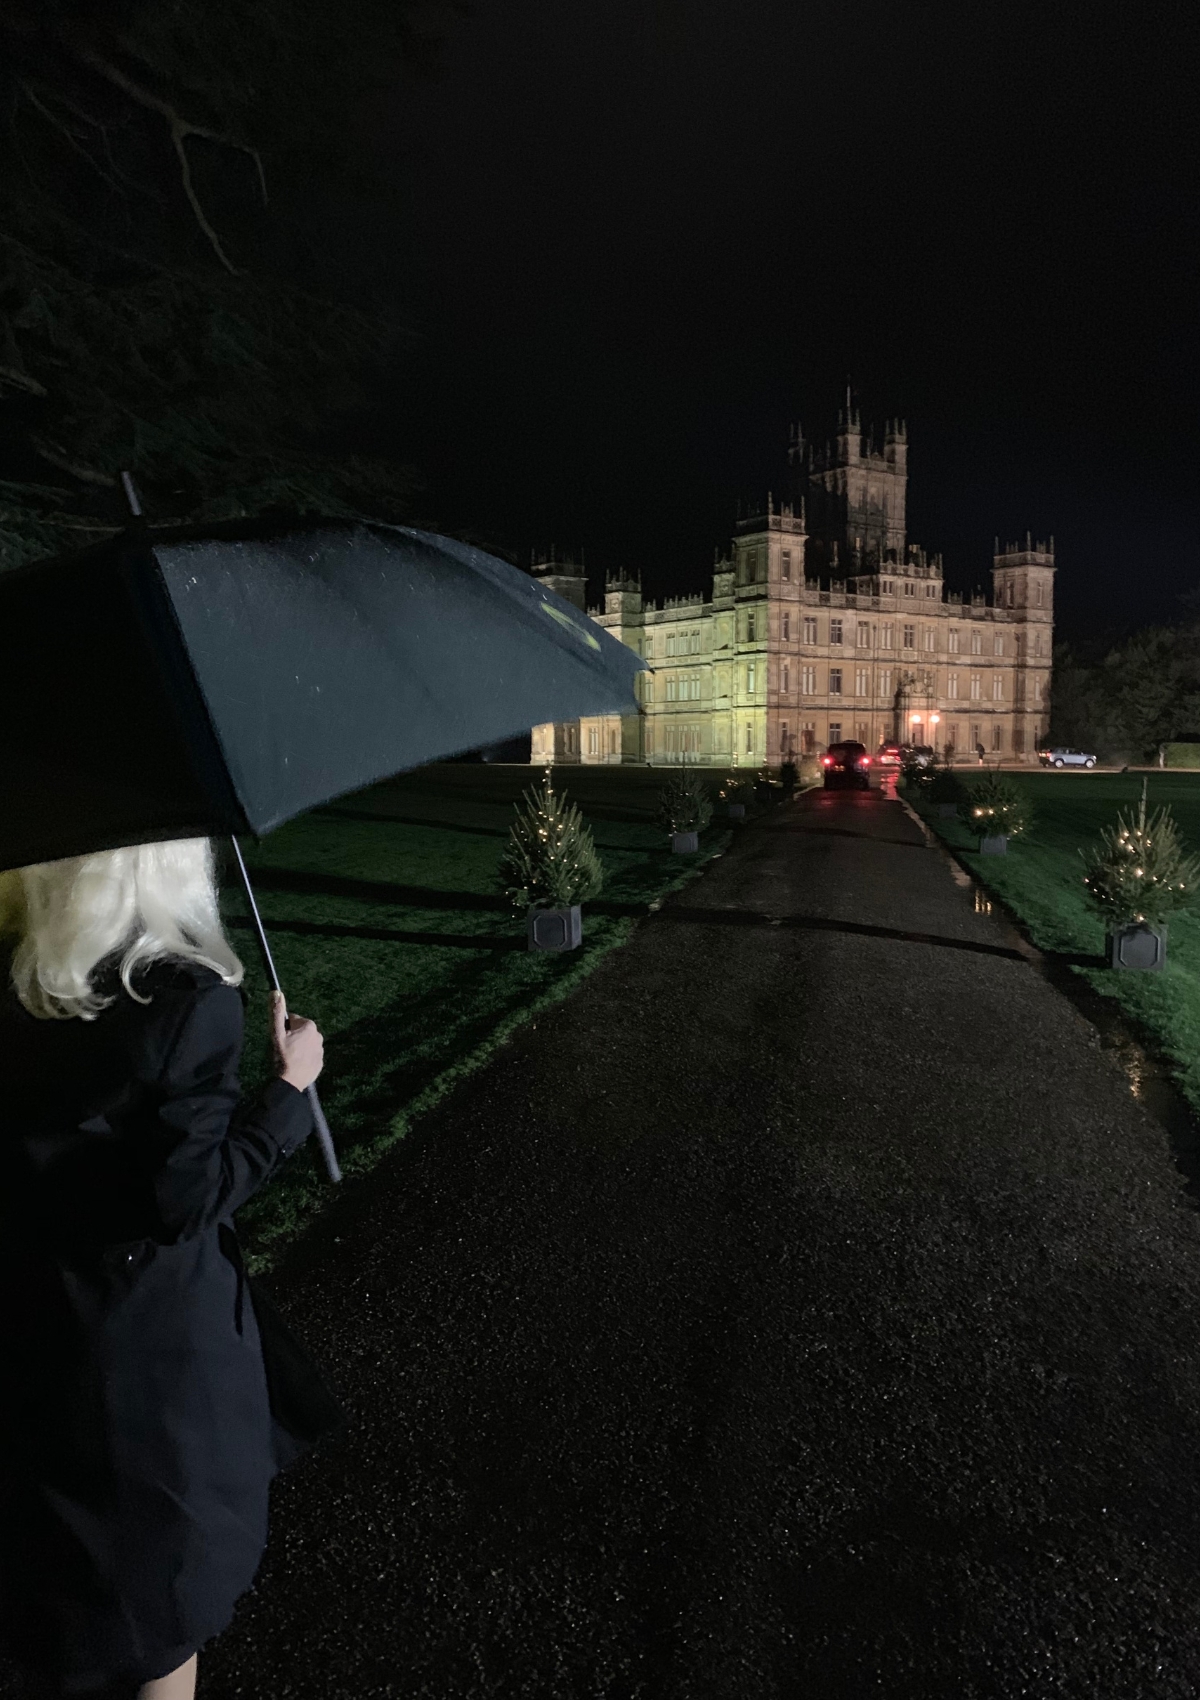 Approaching Highclere Castle - the real Downton Abbey - on foot at night